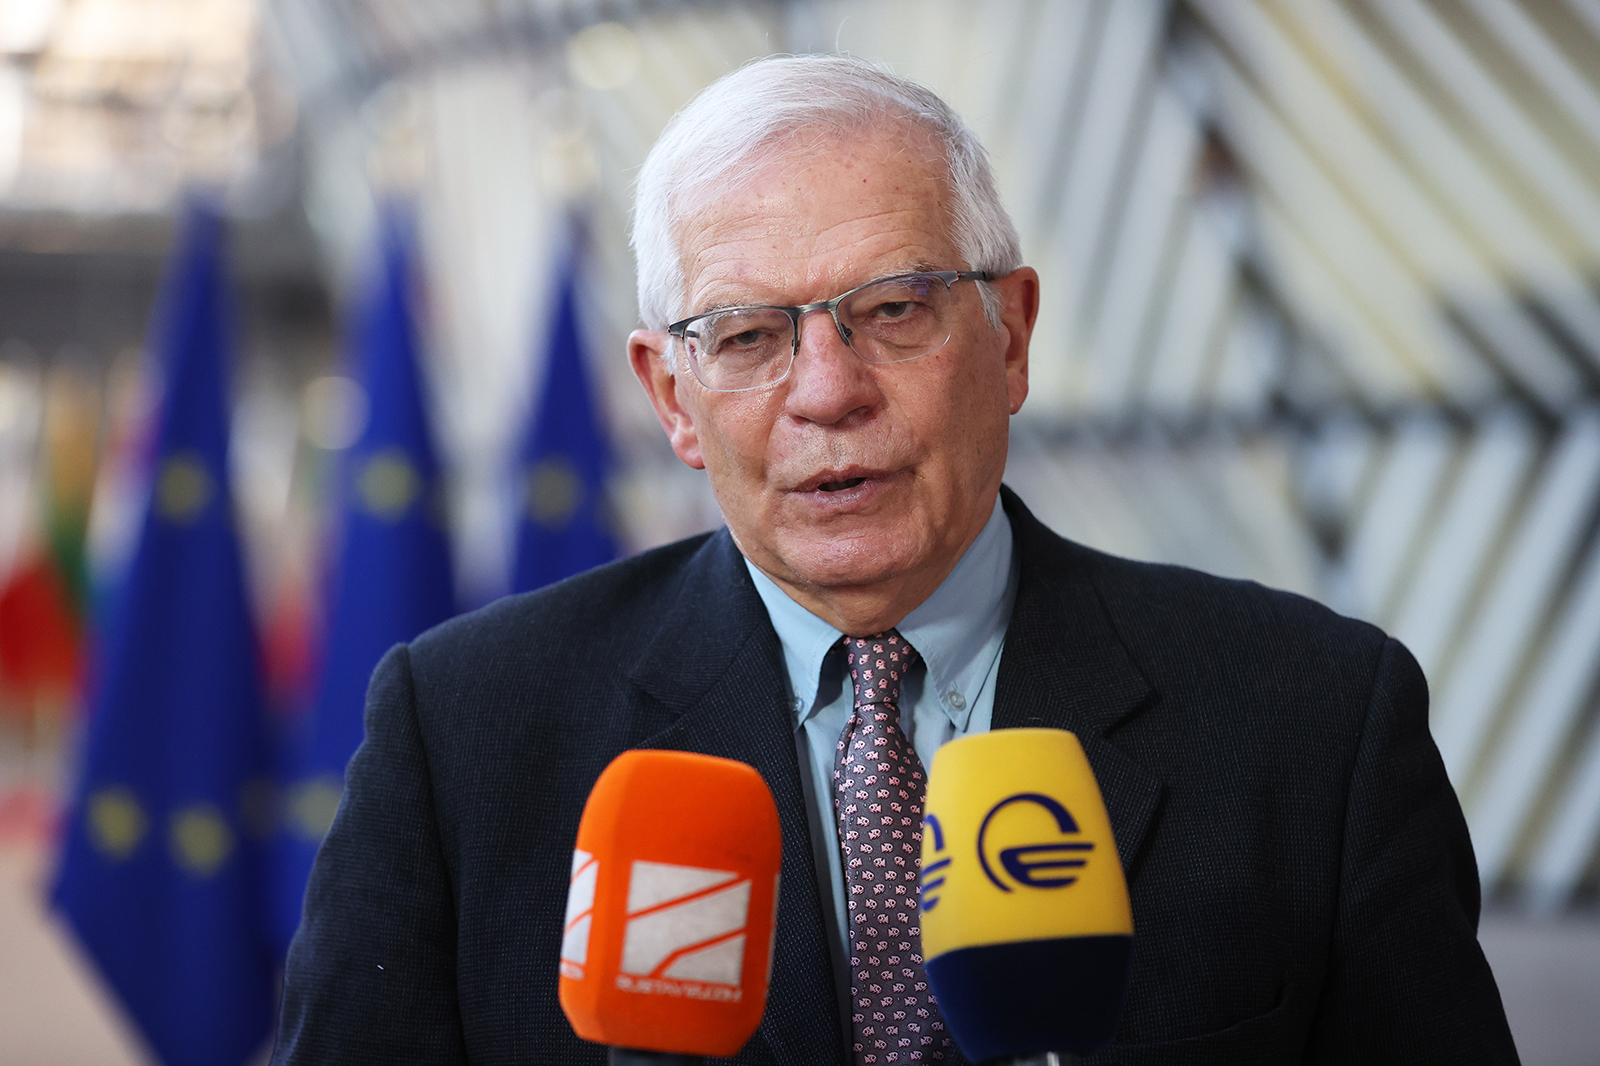 Representative of the European Union for Foreign Affairs and Security Policy Josep Borrell holds a press conference in Brussels, Belgium, on February 28.